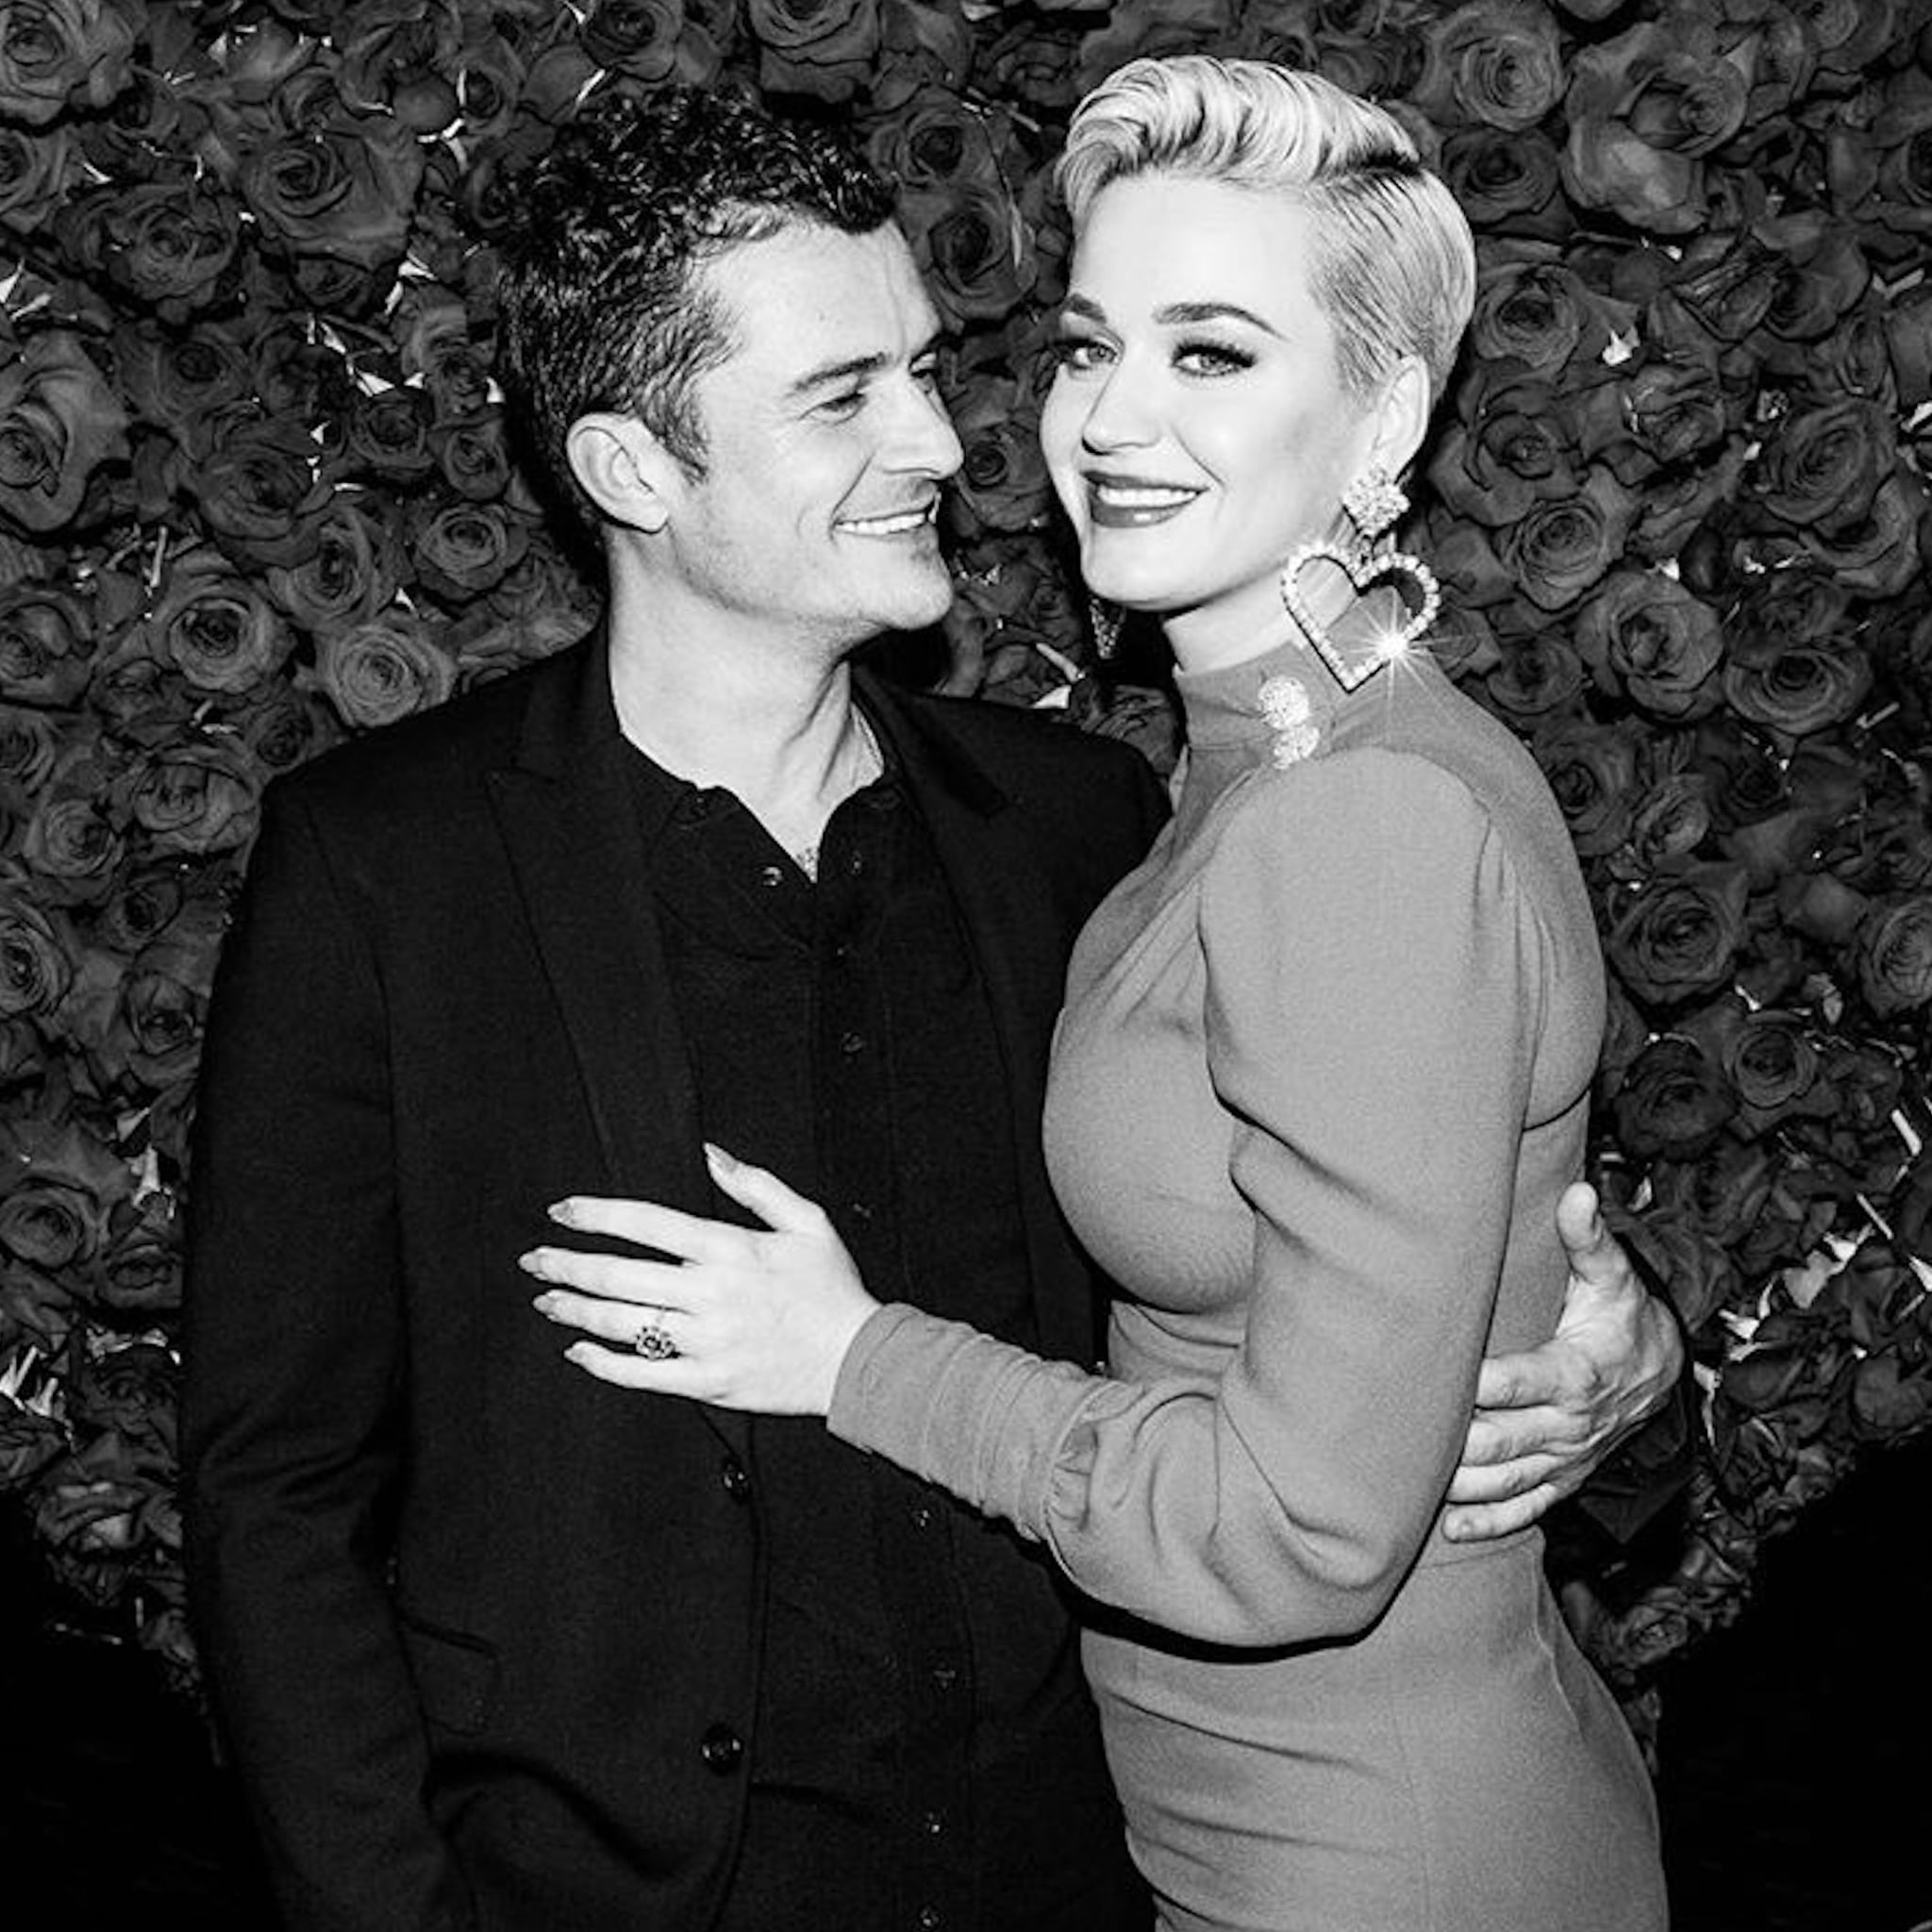 Katy Perry and Orlando Bloom's Cutest Pictures | POPSUGAR Celebrity